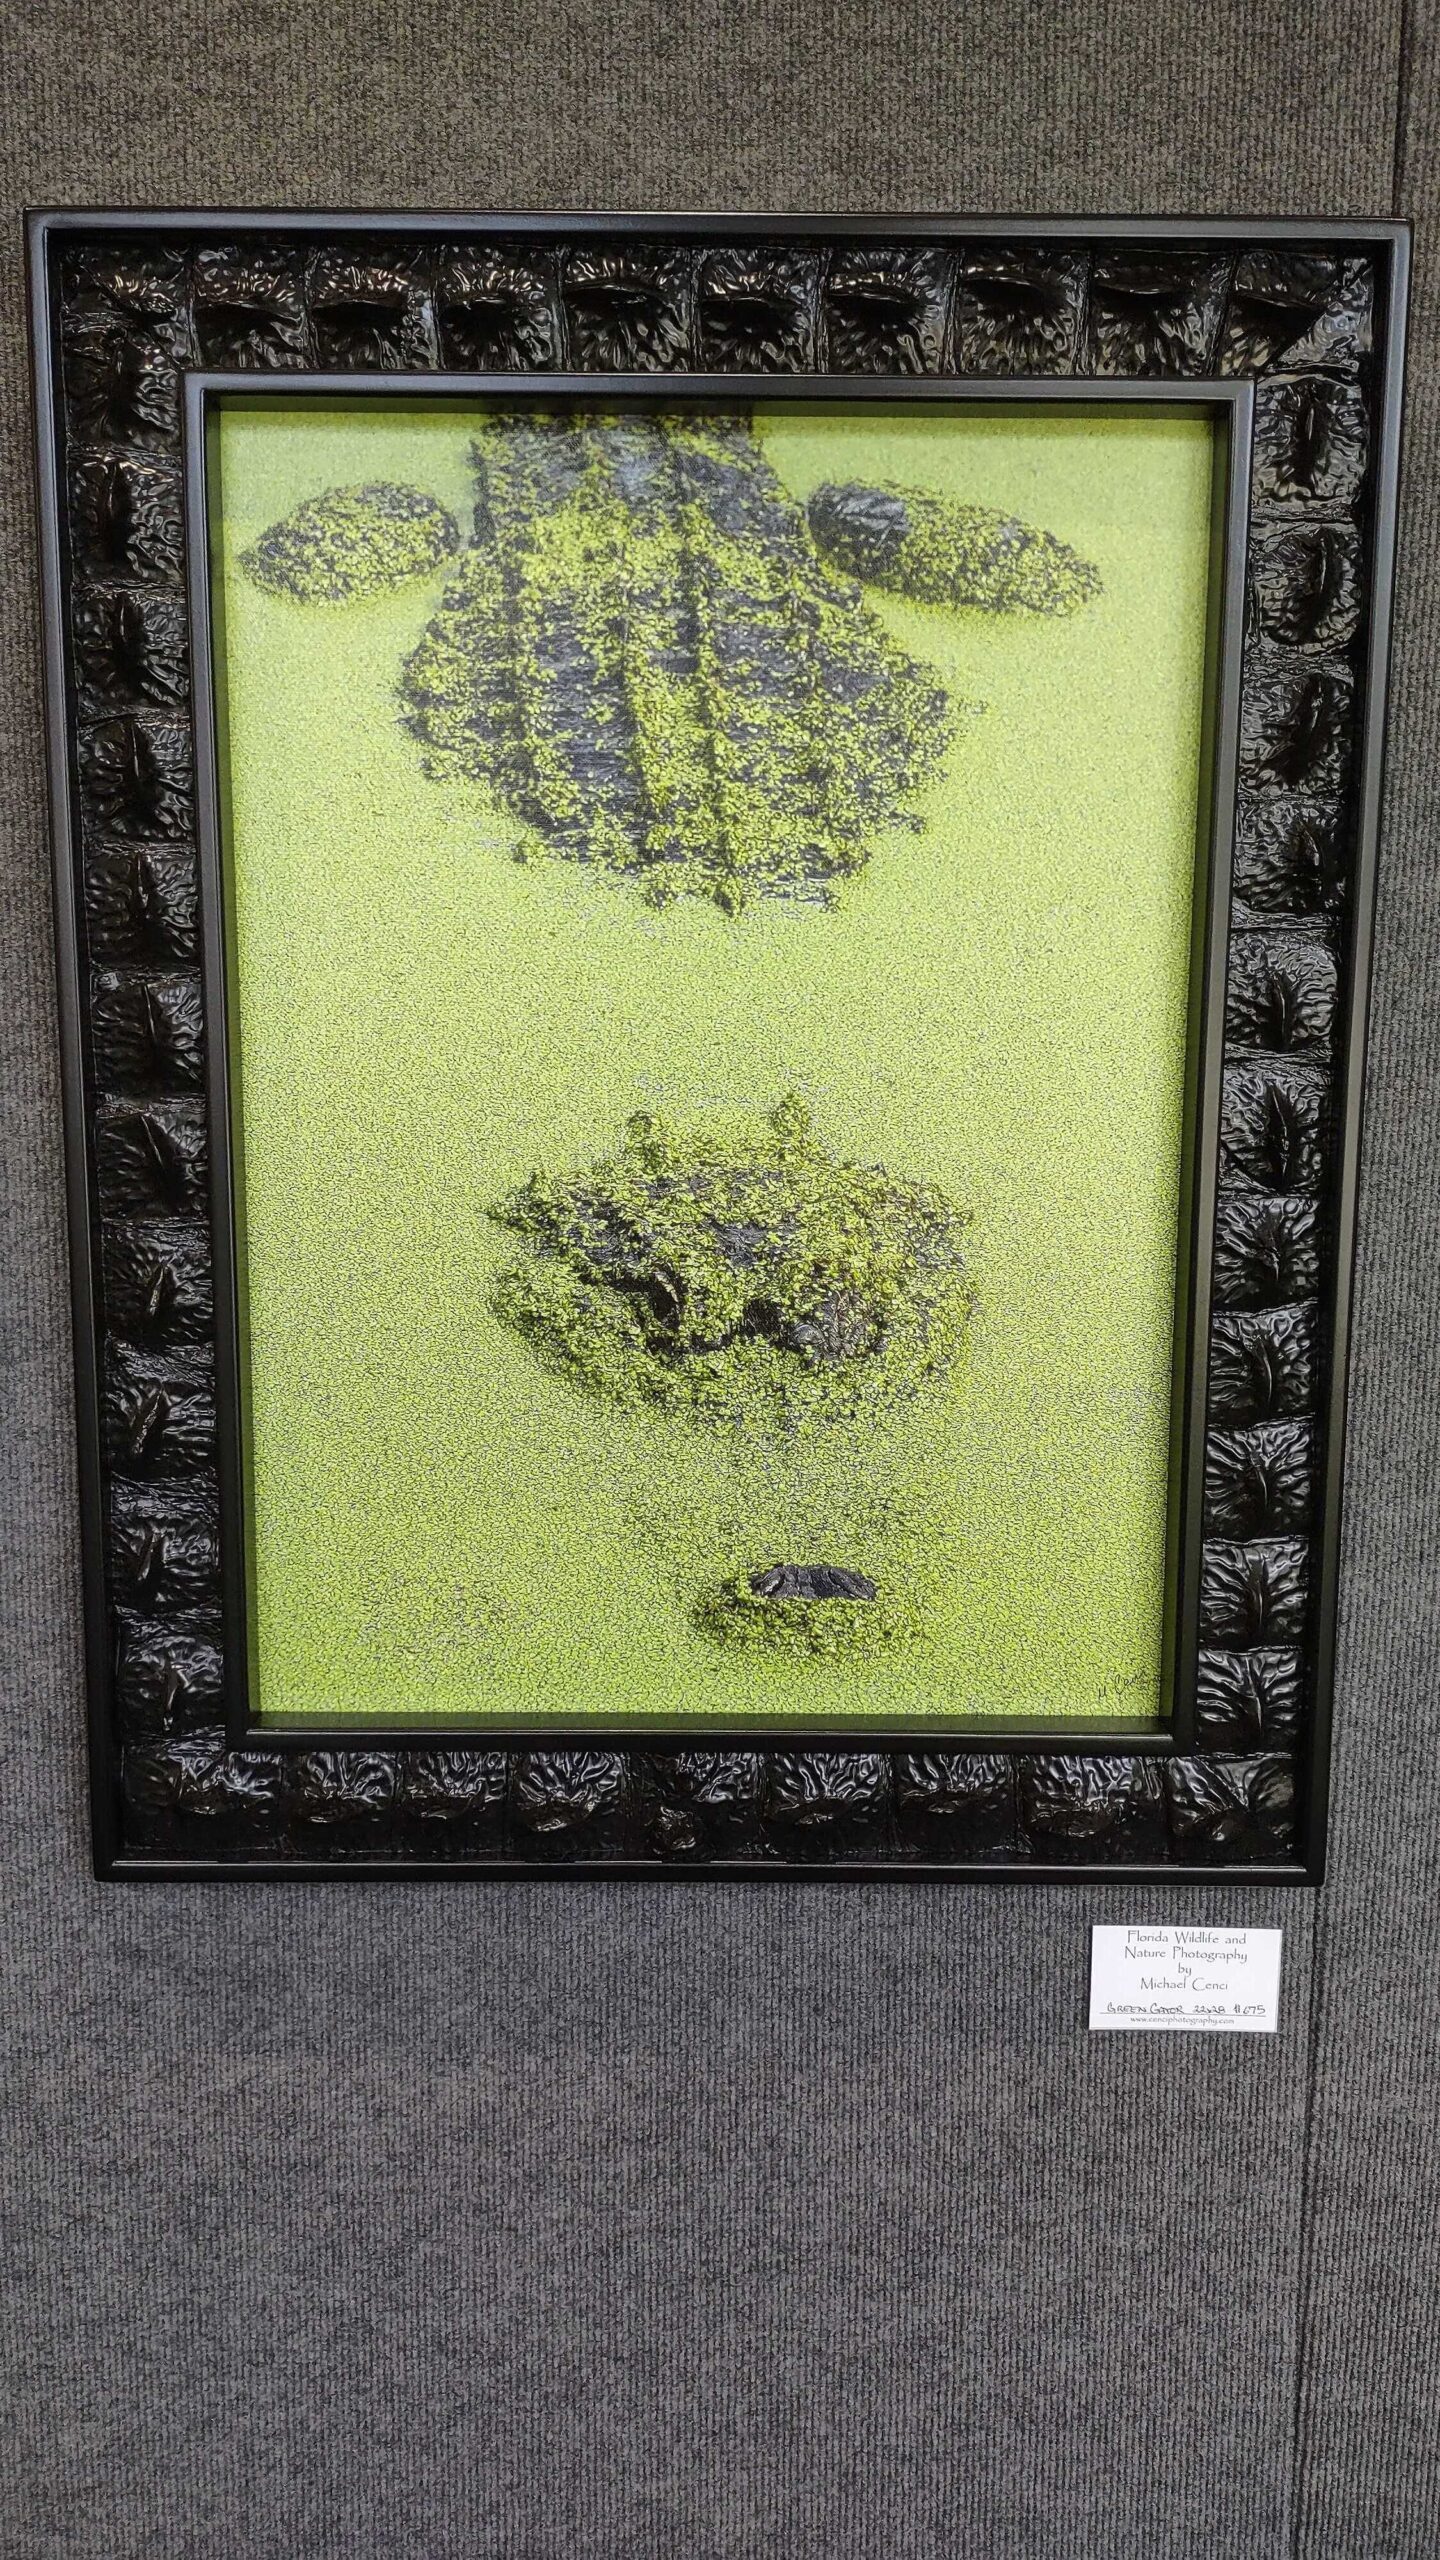 A framed picture of a crocodile on display.